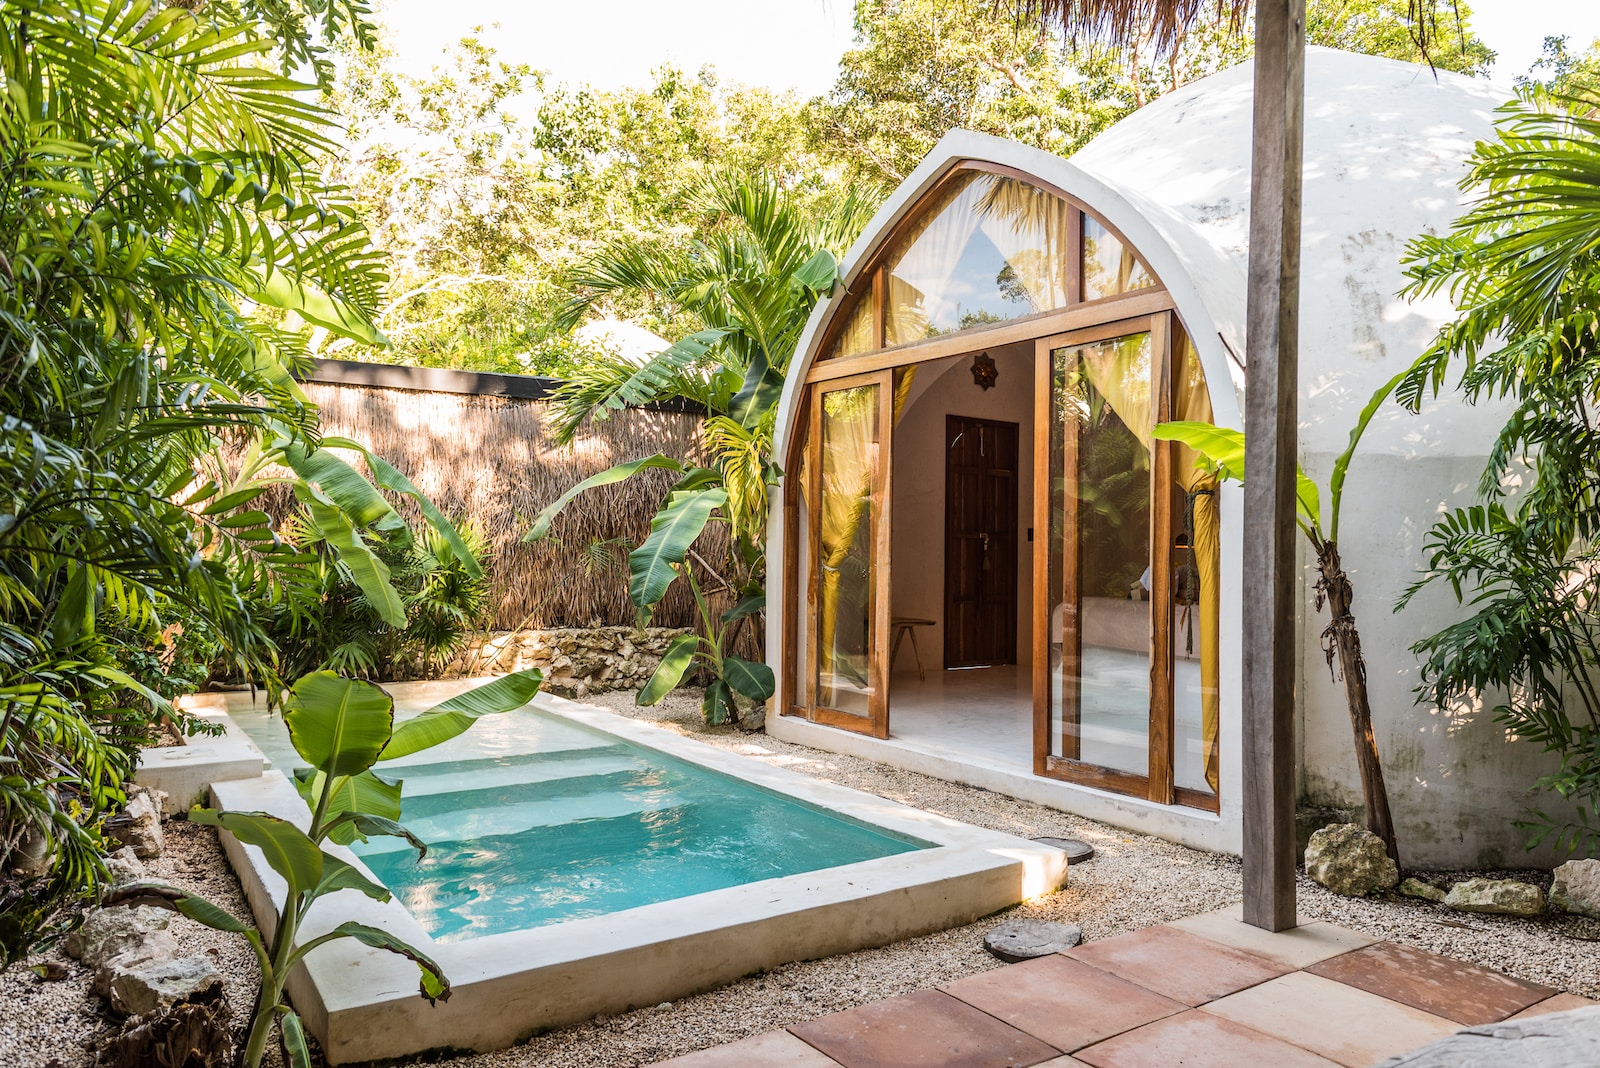 plunge pool in the middle of a garden